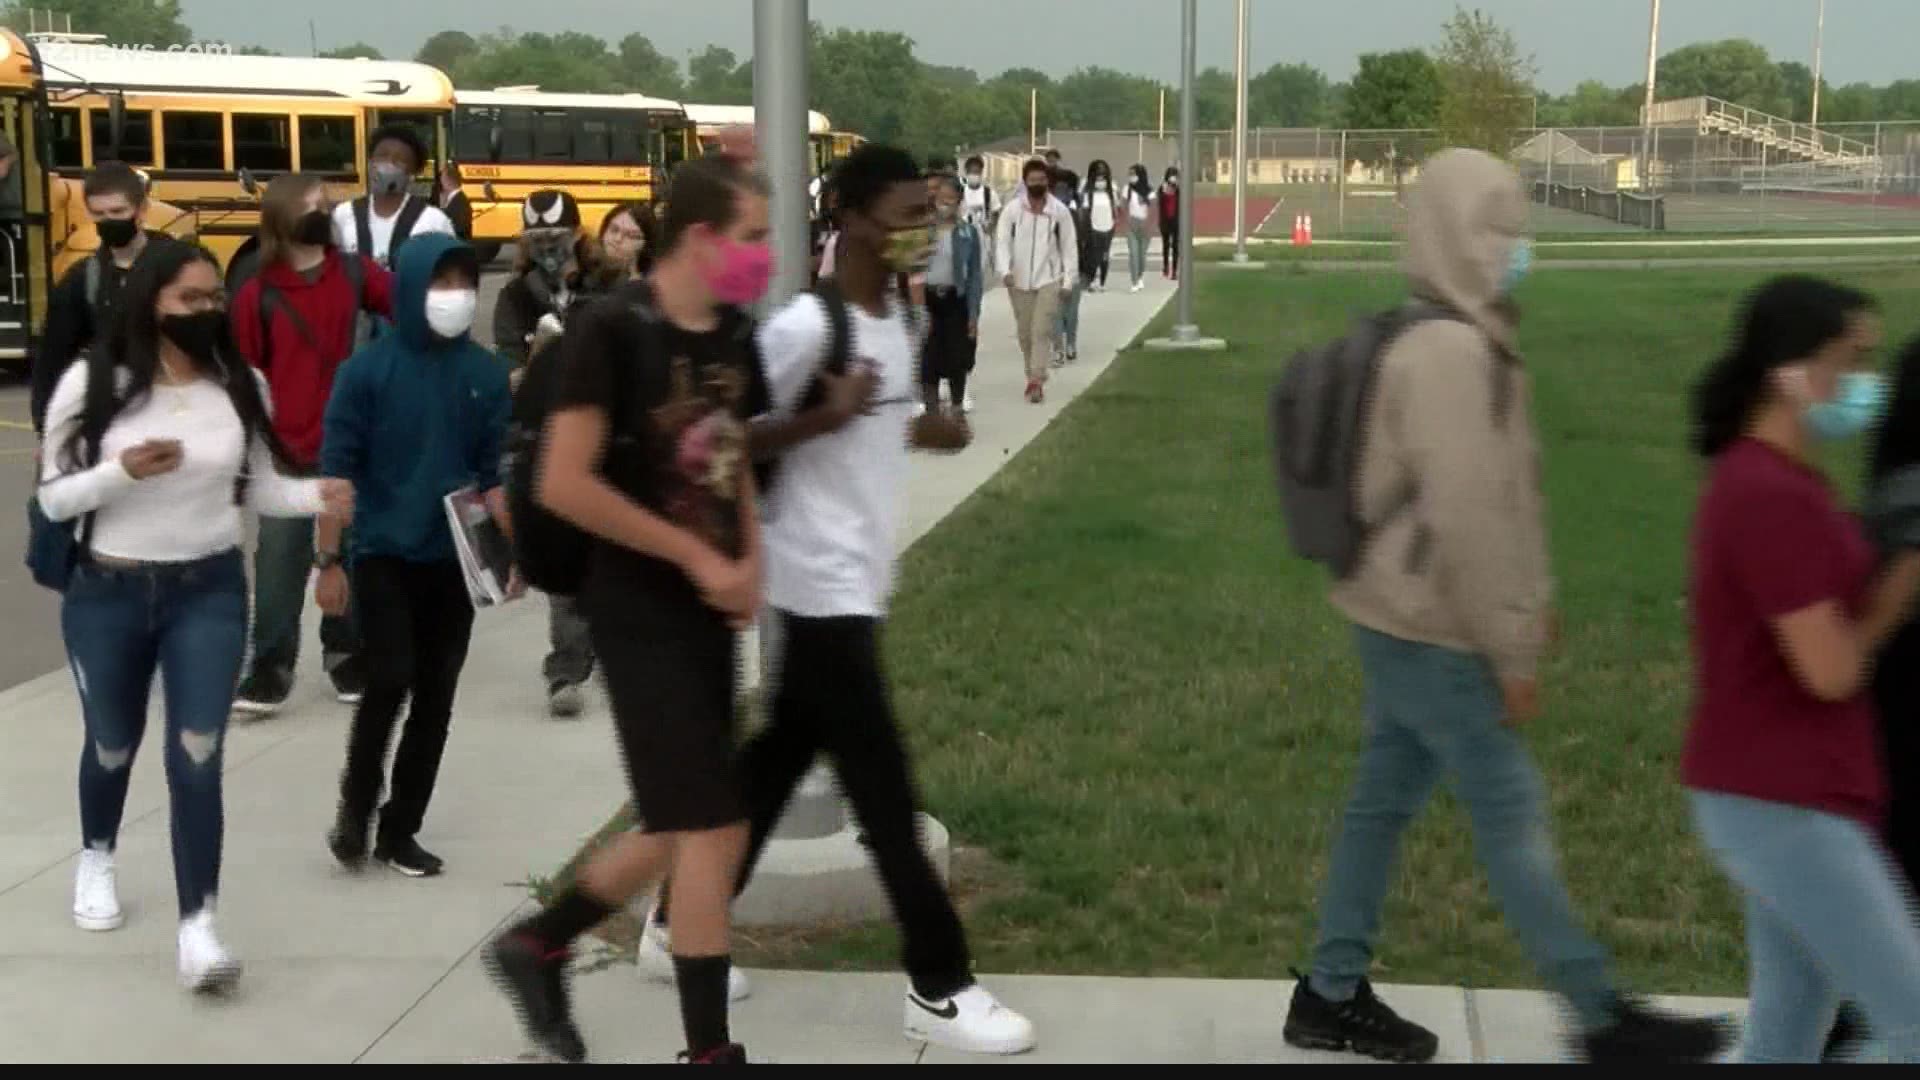 The district said it will require everyone to wear masks inside schools when students return to campuses on Monday regardless of their vaccination status.